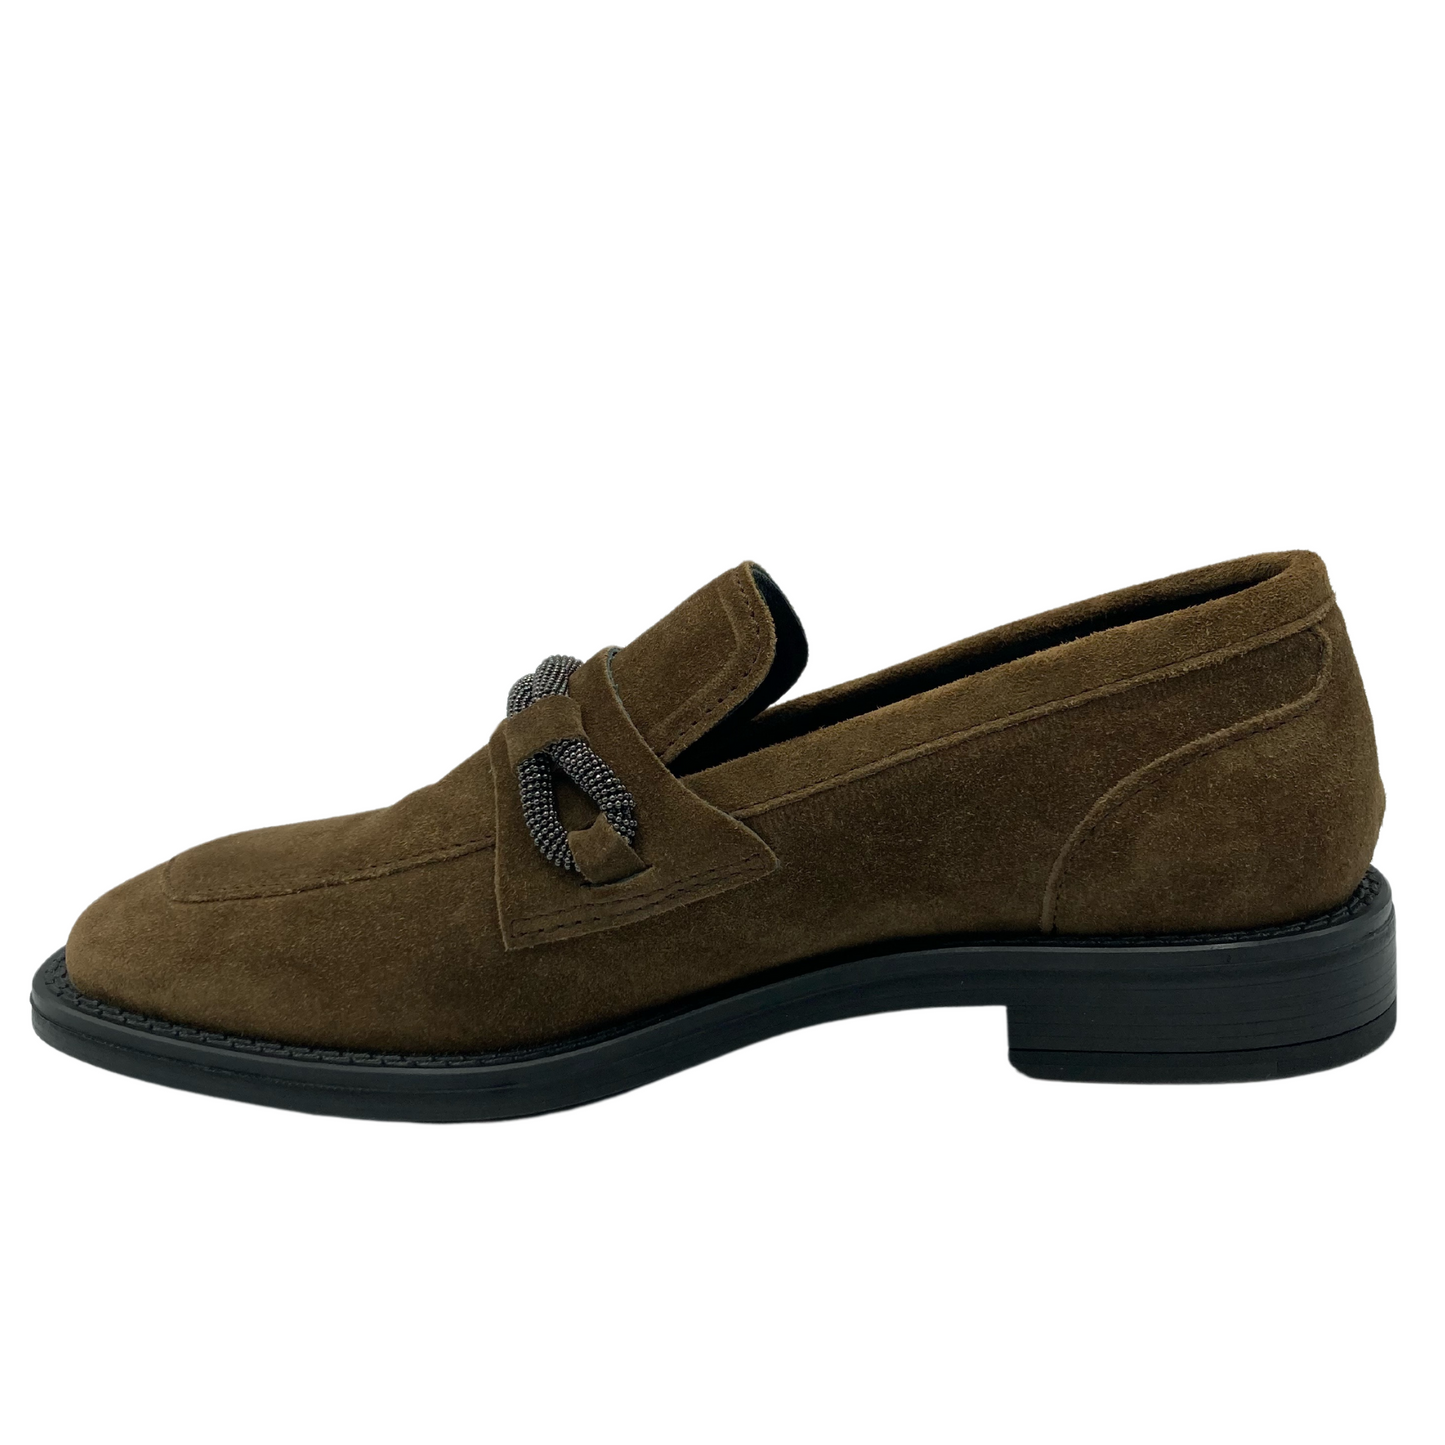 Left facing view of brown suede loafer with short heel and black outsole